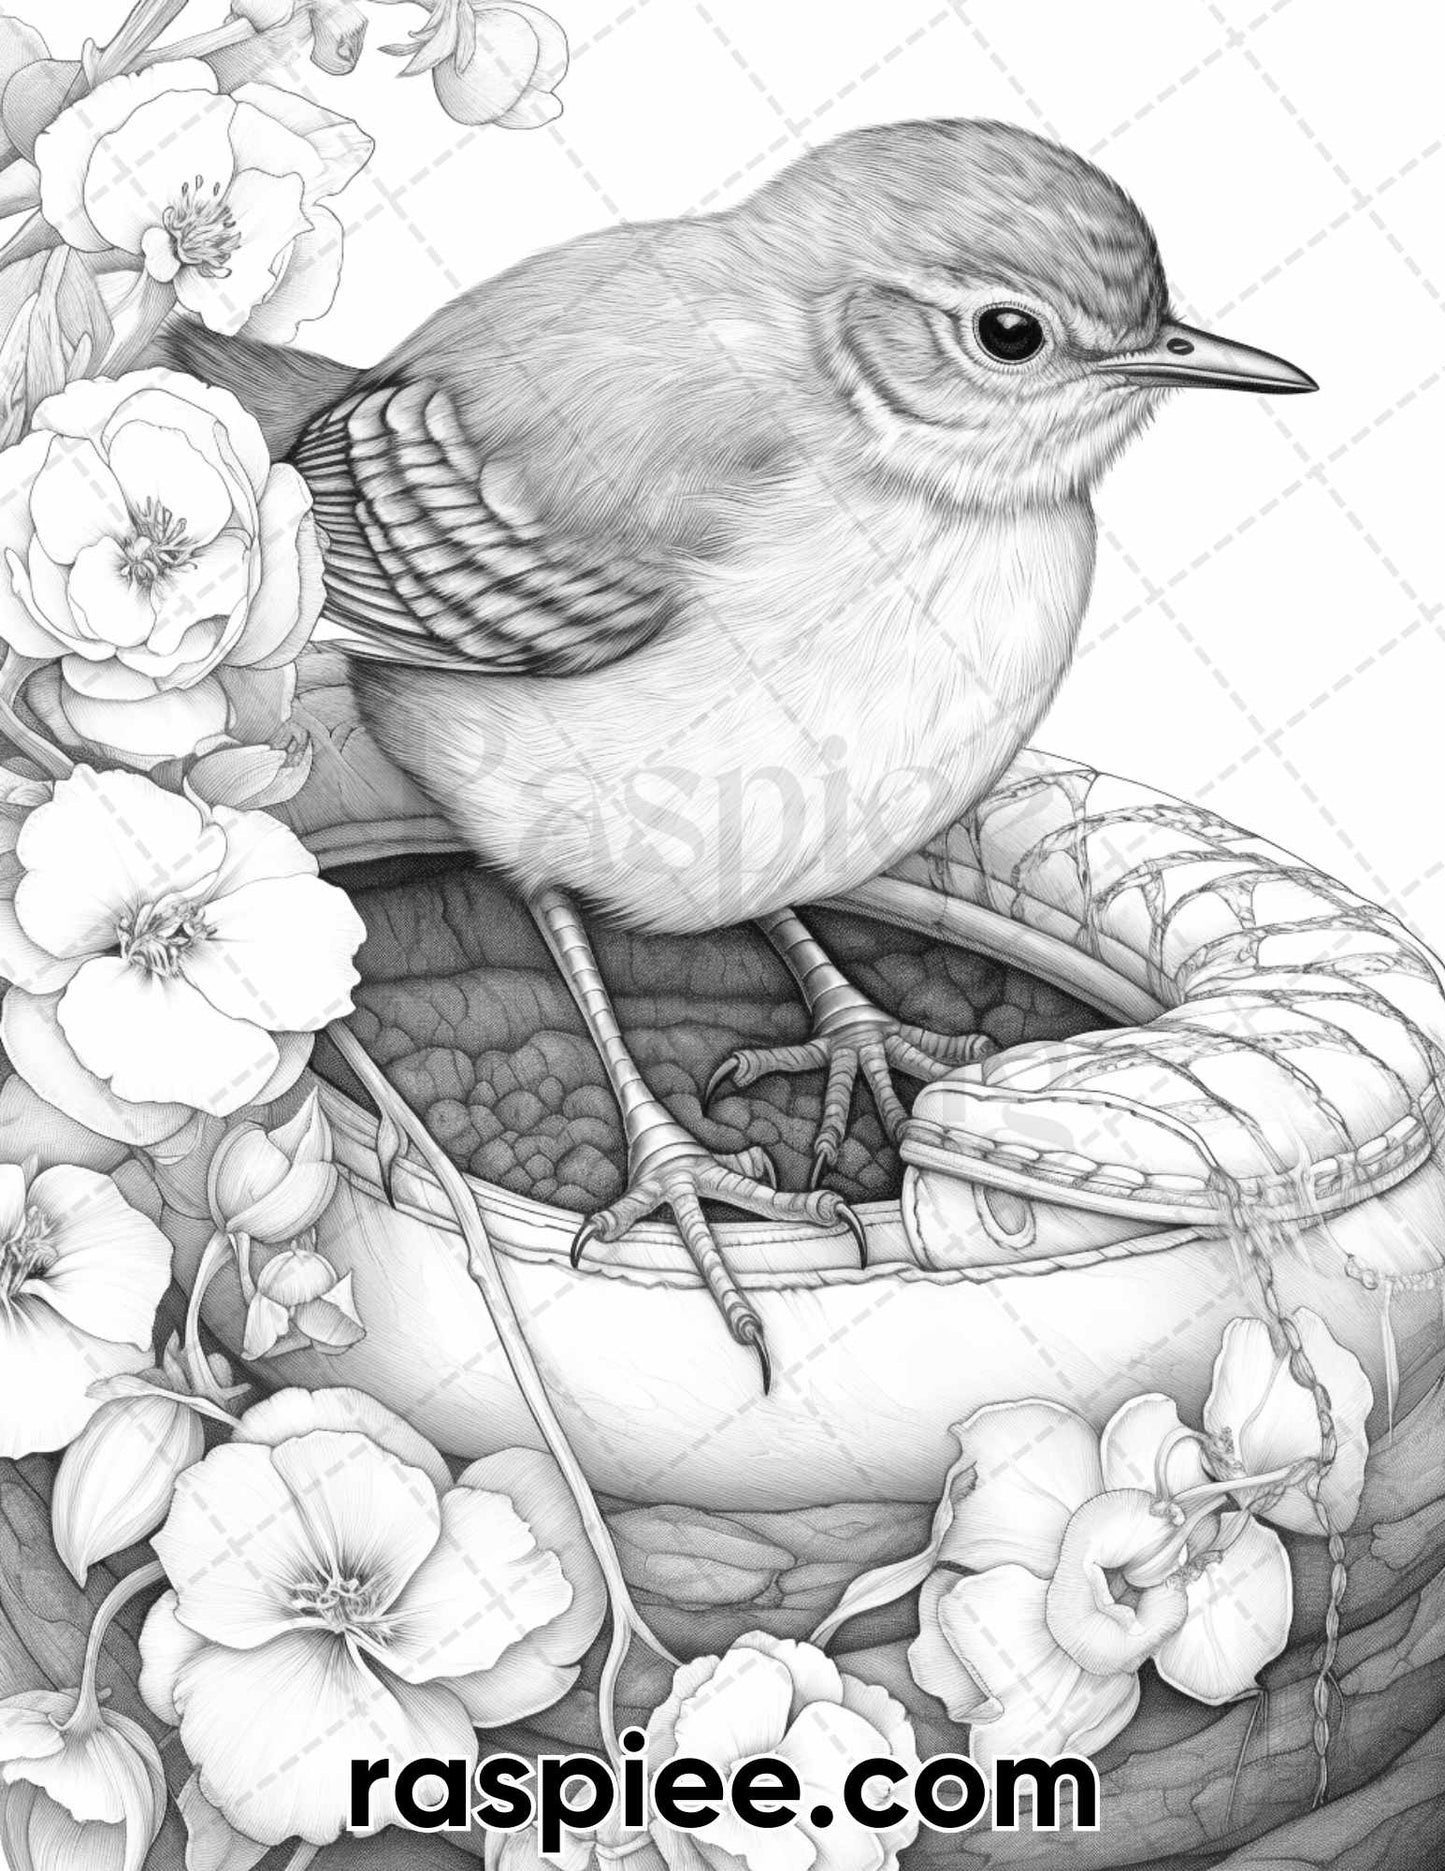 adult coloring pages, adult coloring sheets, adult coloring book pdf, adult coloring book printable, spring coloring pages for adults, spring coloring book, animal coloring pages for adults, animal coloring book, bird coloring pages, bird coloring book